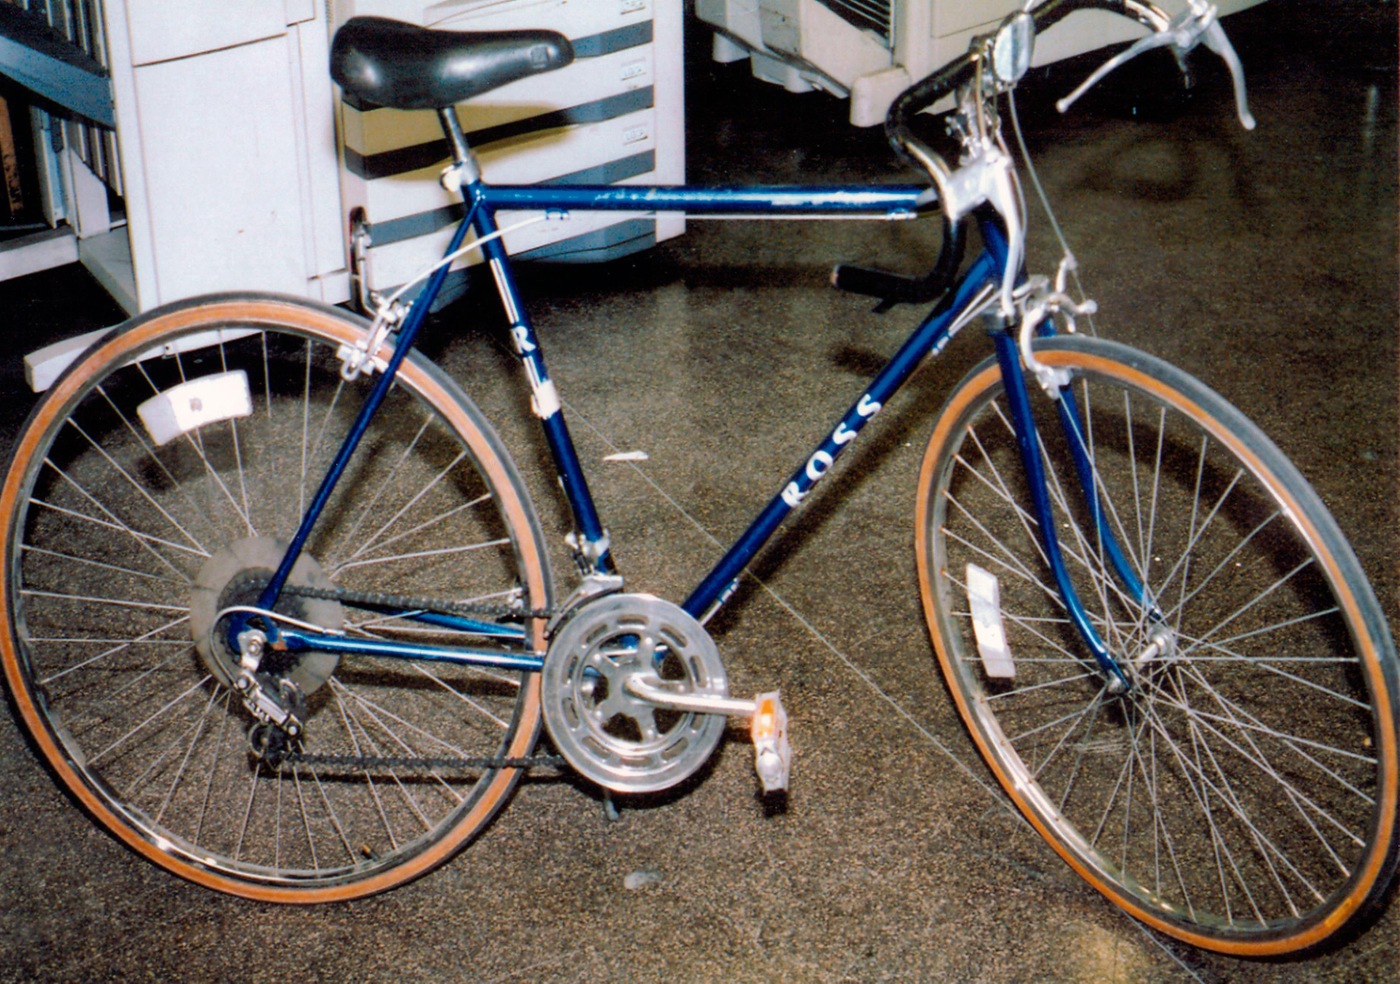 Blue Ross bicycle used by suspect in the unsolved March 6, 2008 bombing of the United States Armed Forces Recruiting Station in Times Square. See https://www.fbi.gov/contact-us/field-offices/newyork/news/press-releases/more-than-100-000-being-offered-for-information-in-unsolved-2008-times-square-bombing for more details.